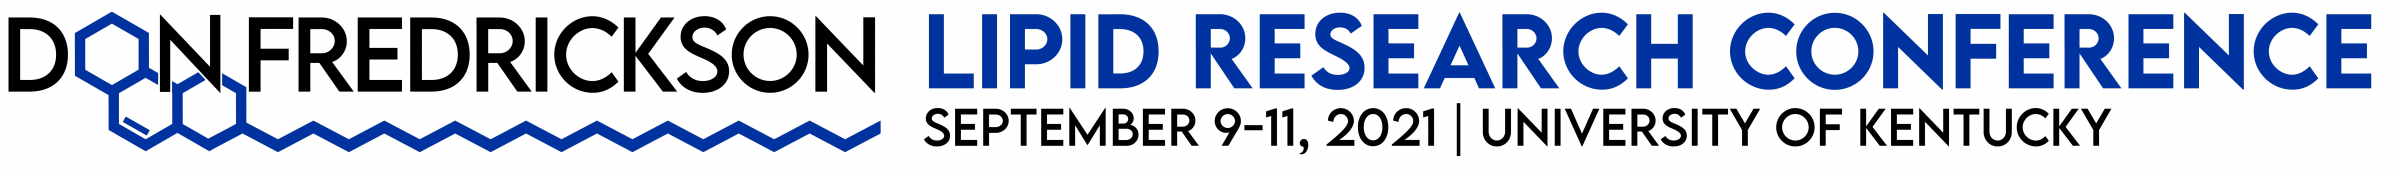 Don Frederickson Lipid Research Conference. Sept. 9-11, 2021 | University of Kentucky